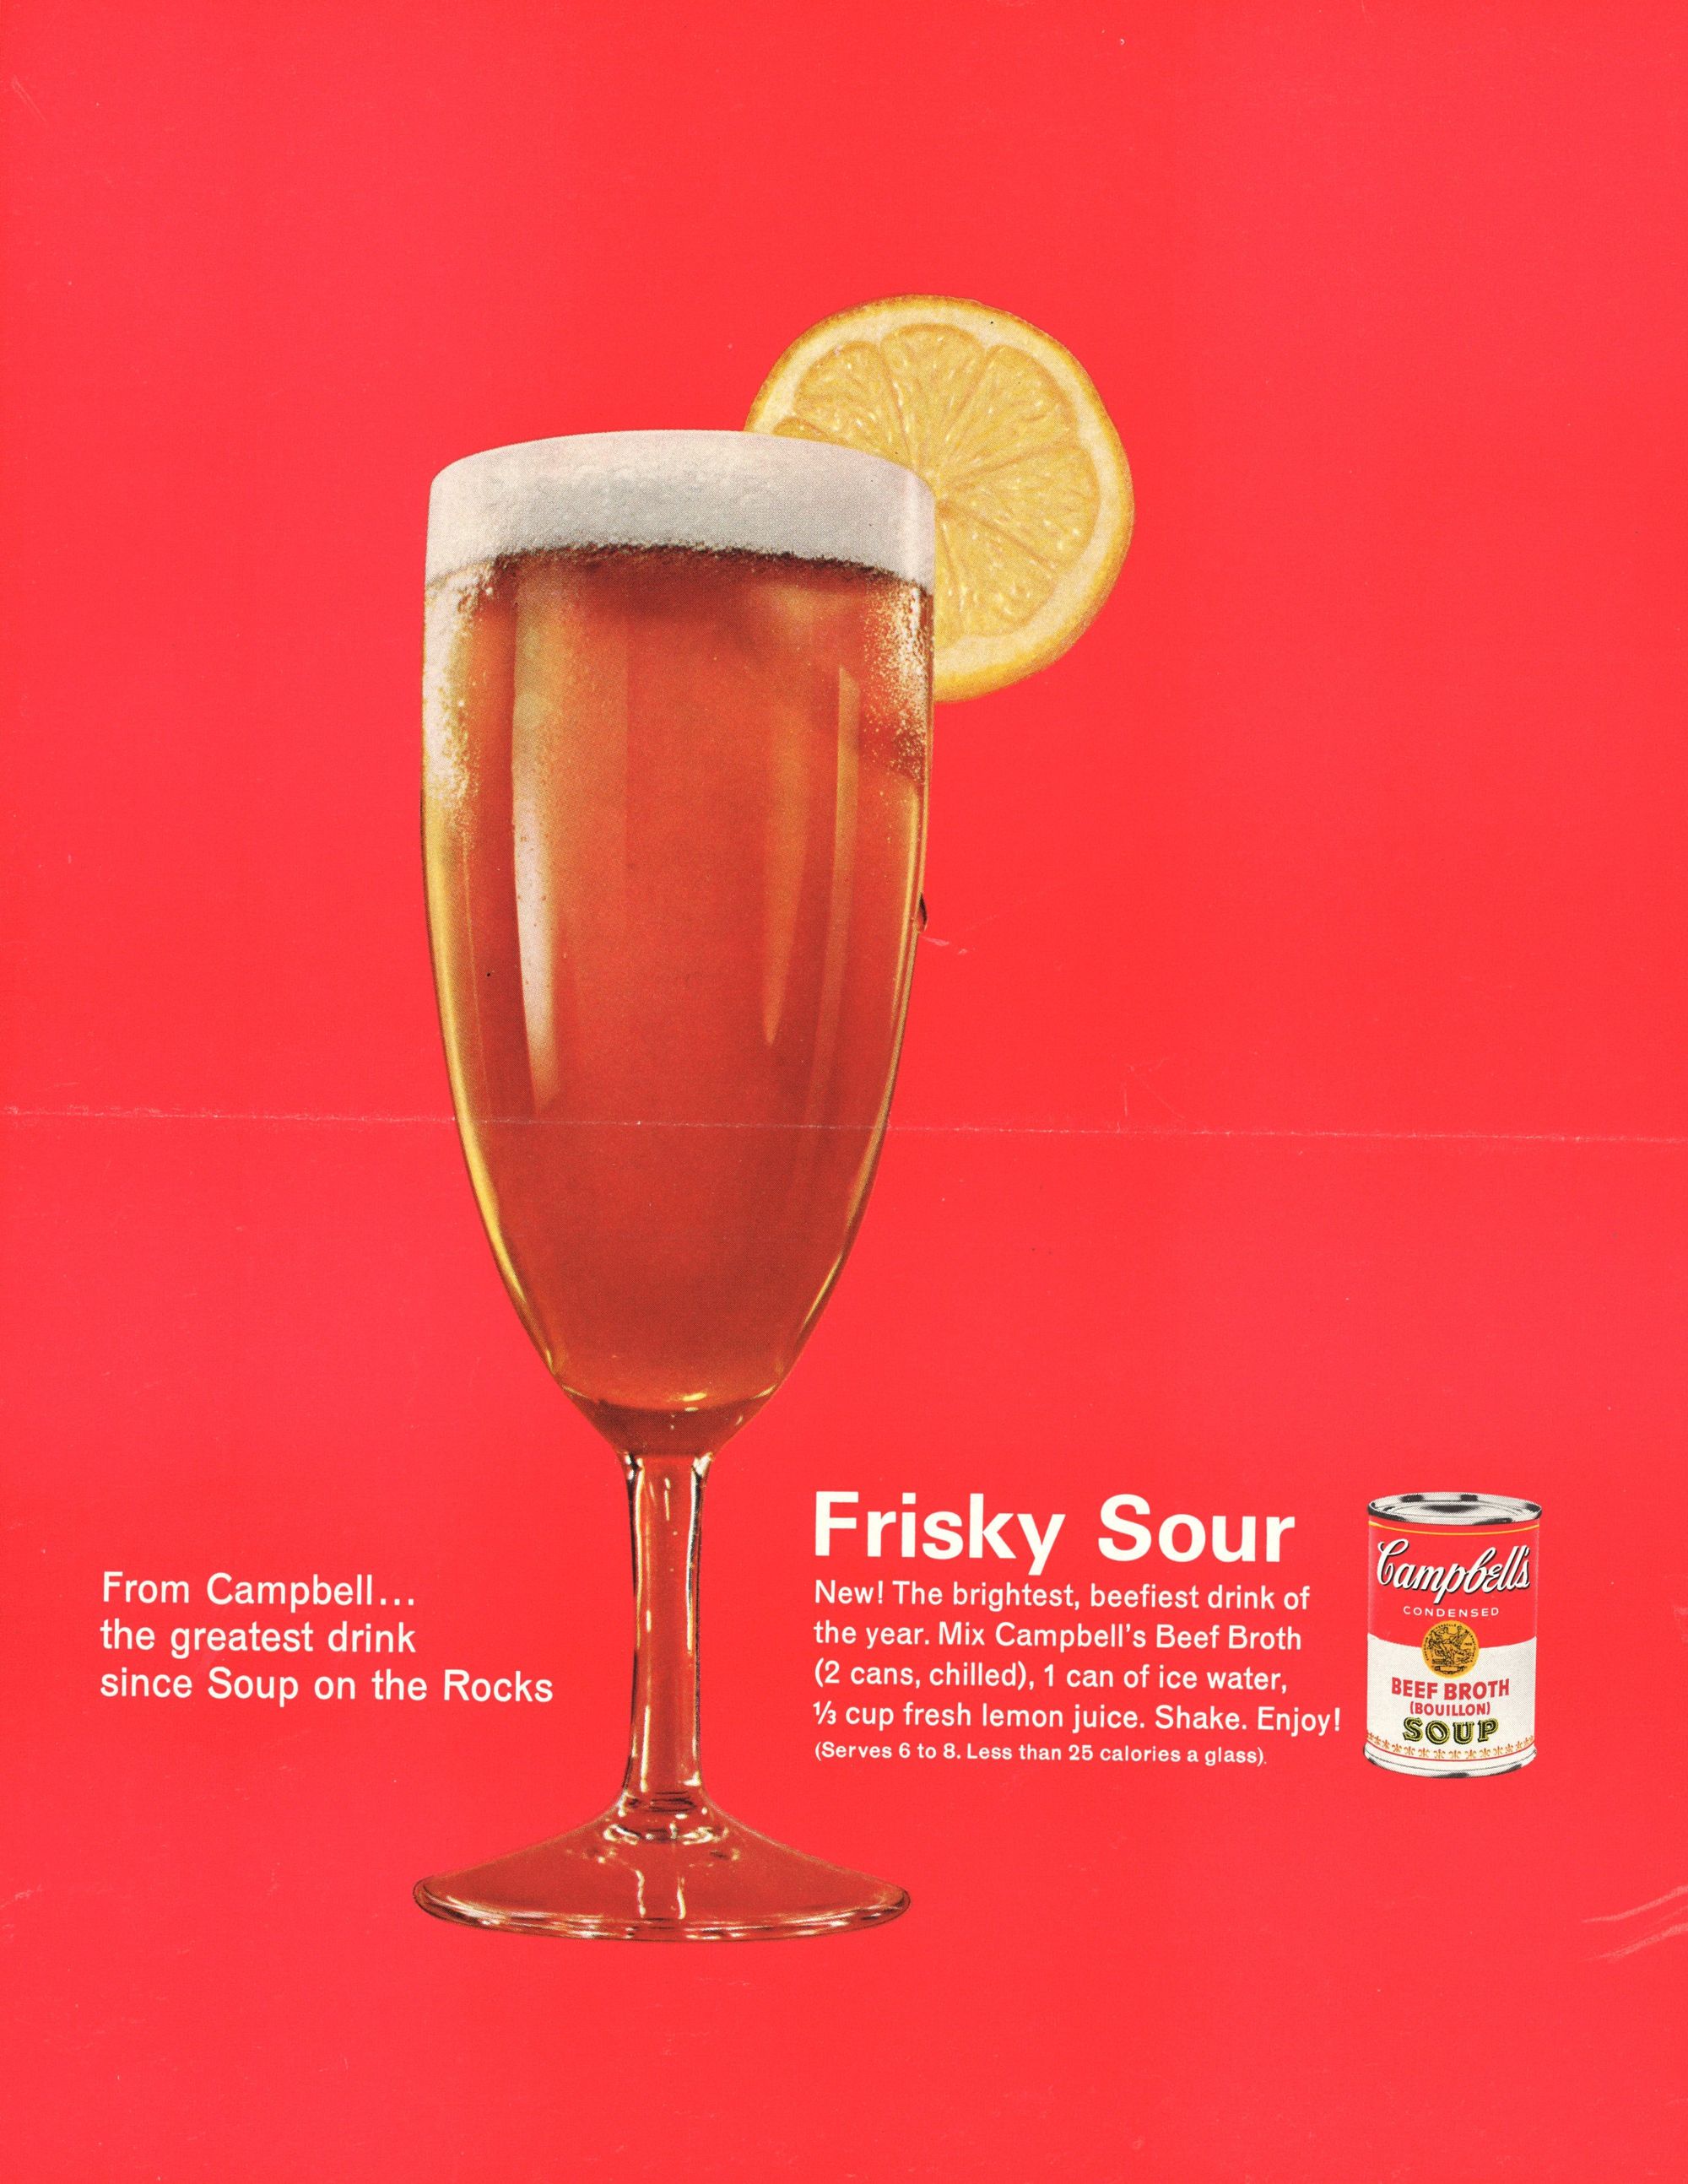 Campbell's Soup add for a "Frisky Sour" which is a disgusting mix of beef broth, water, and lemon juice.